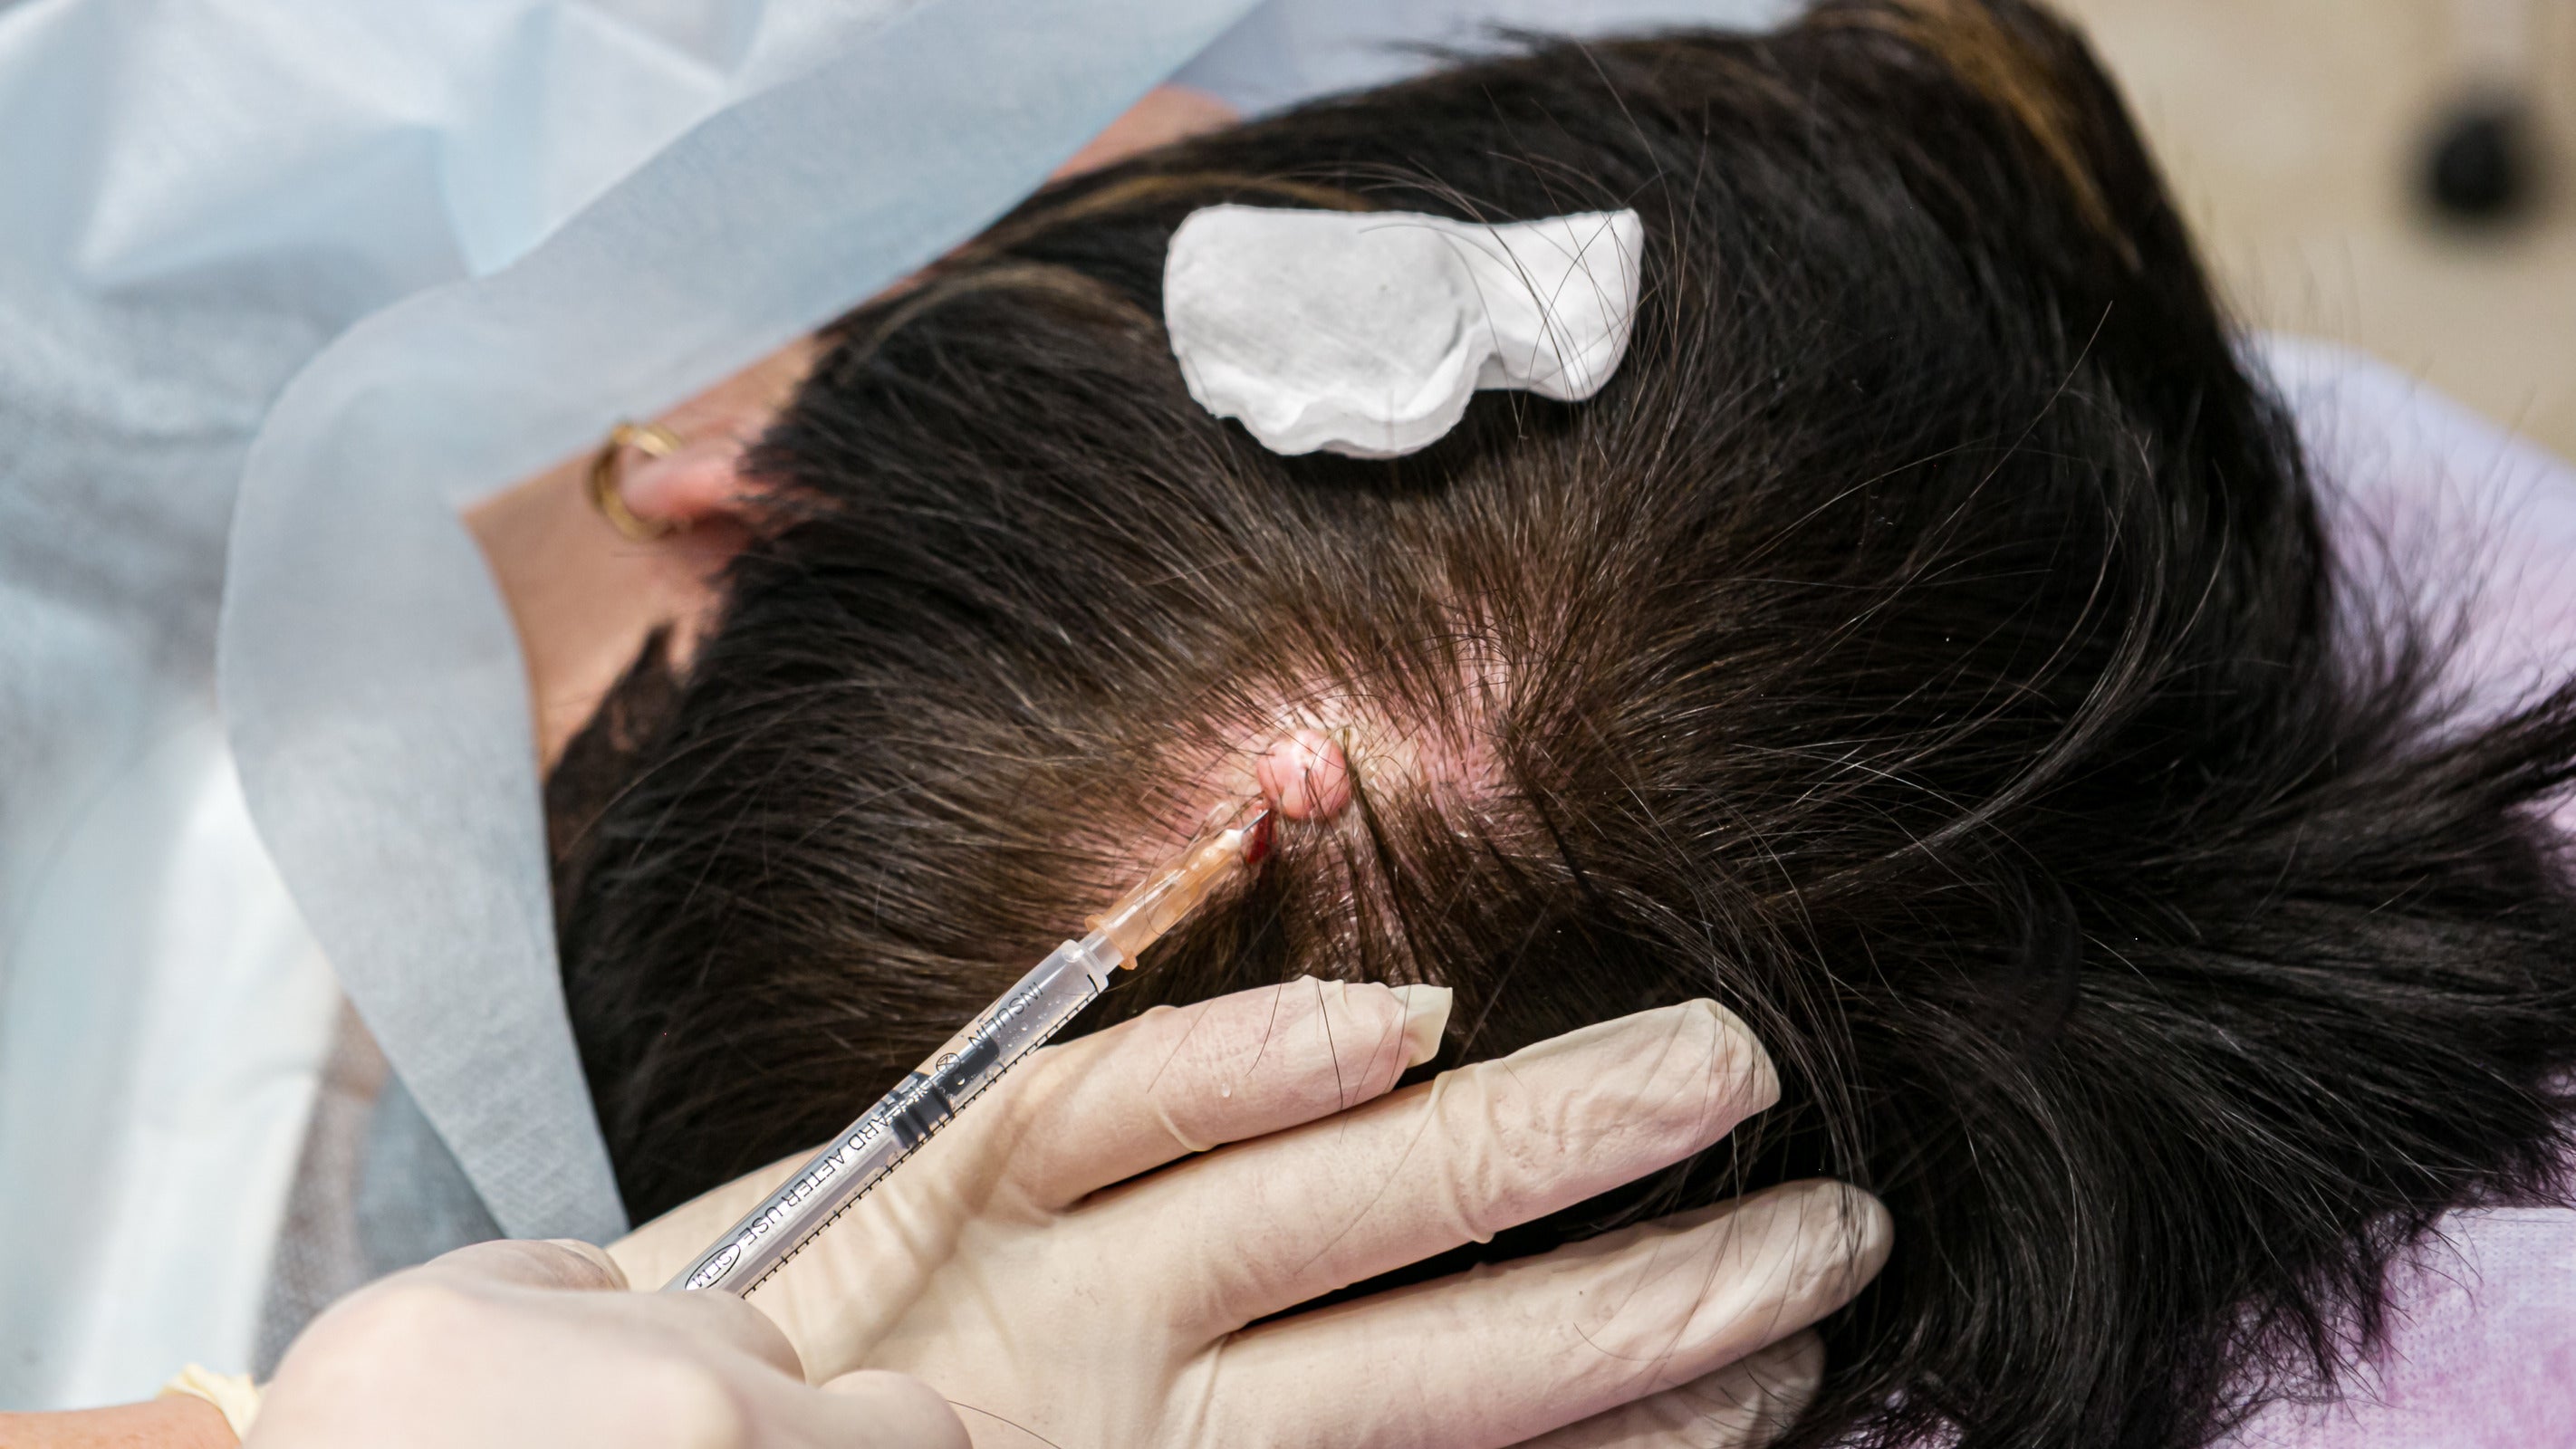 The 3 best methods for removing cysts with minor surgery